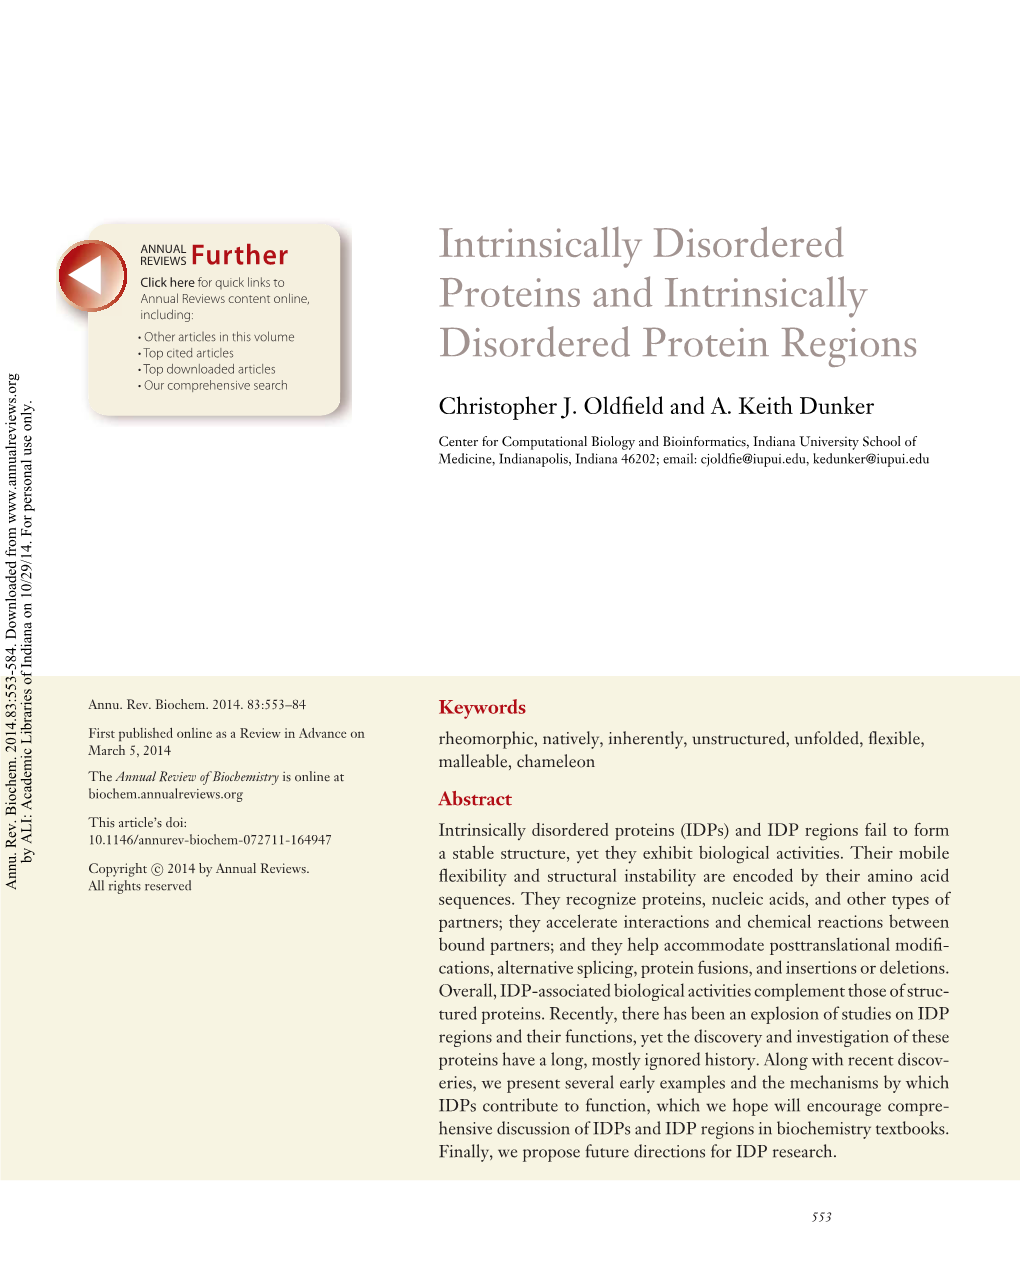 Intrinsically Disordered Proteins and Intrinsically Disordered Protein Regions